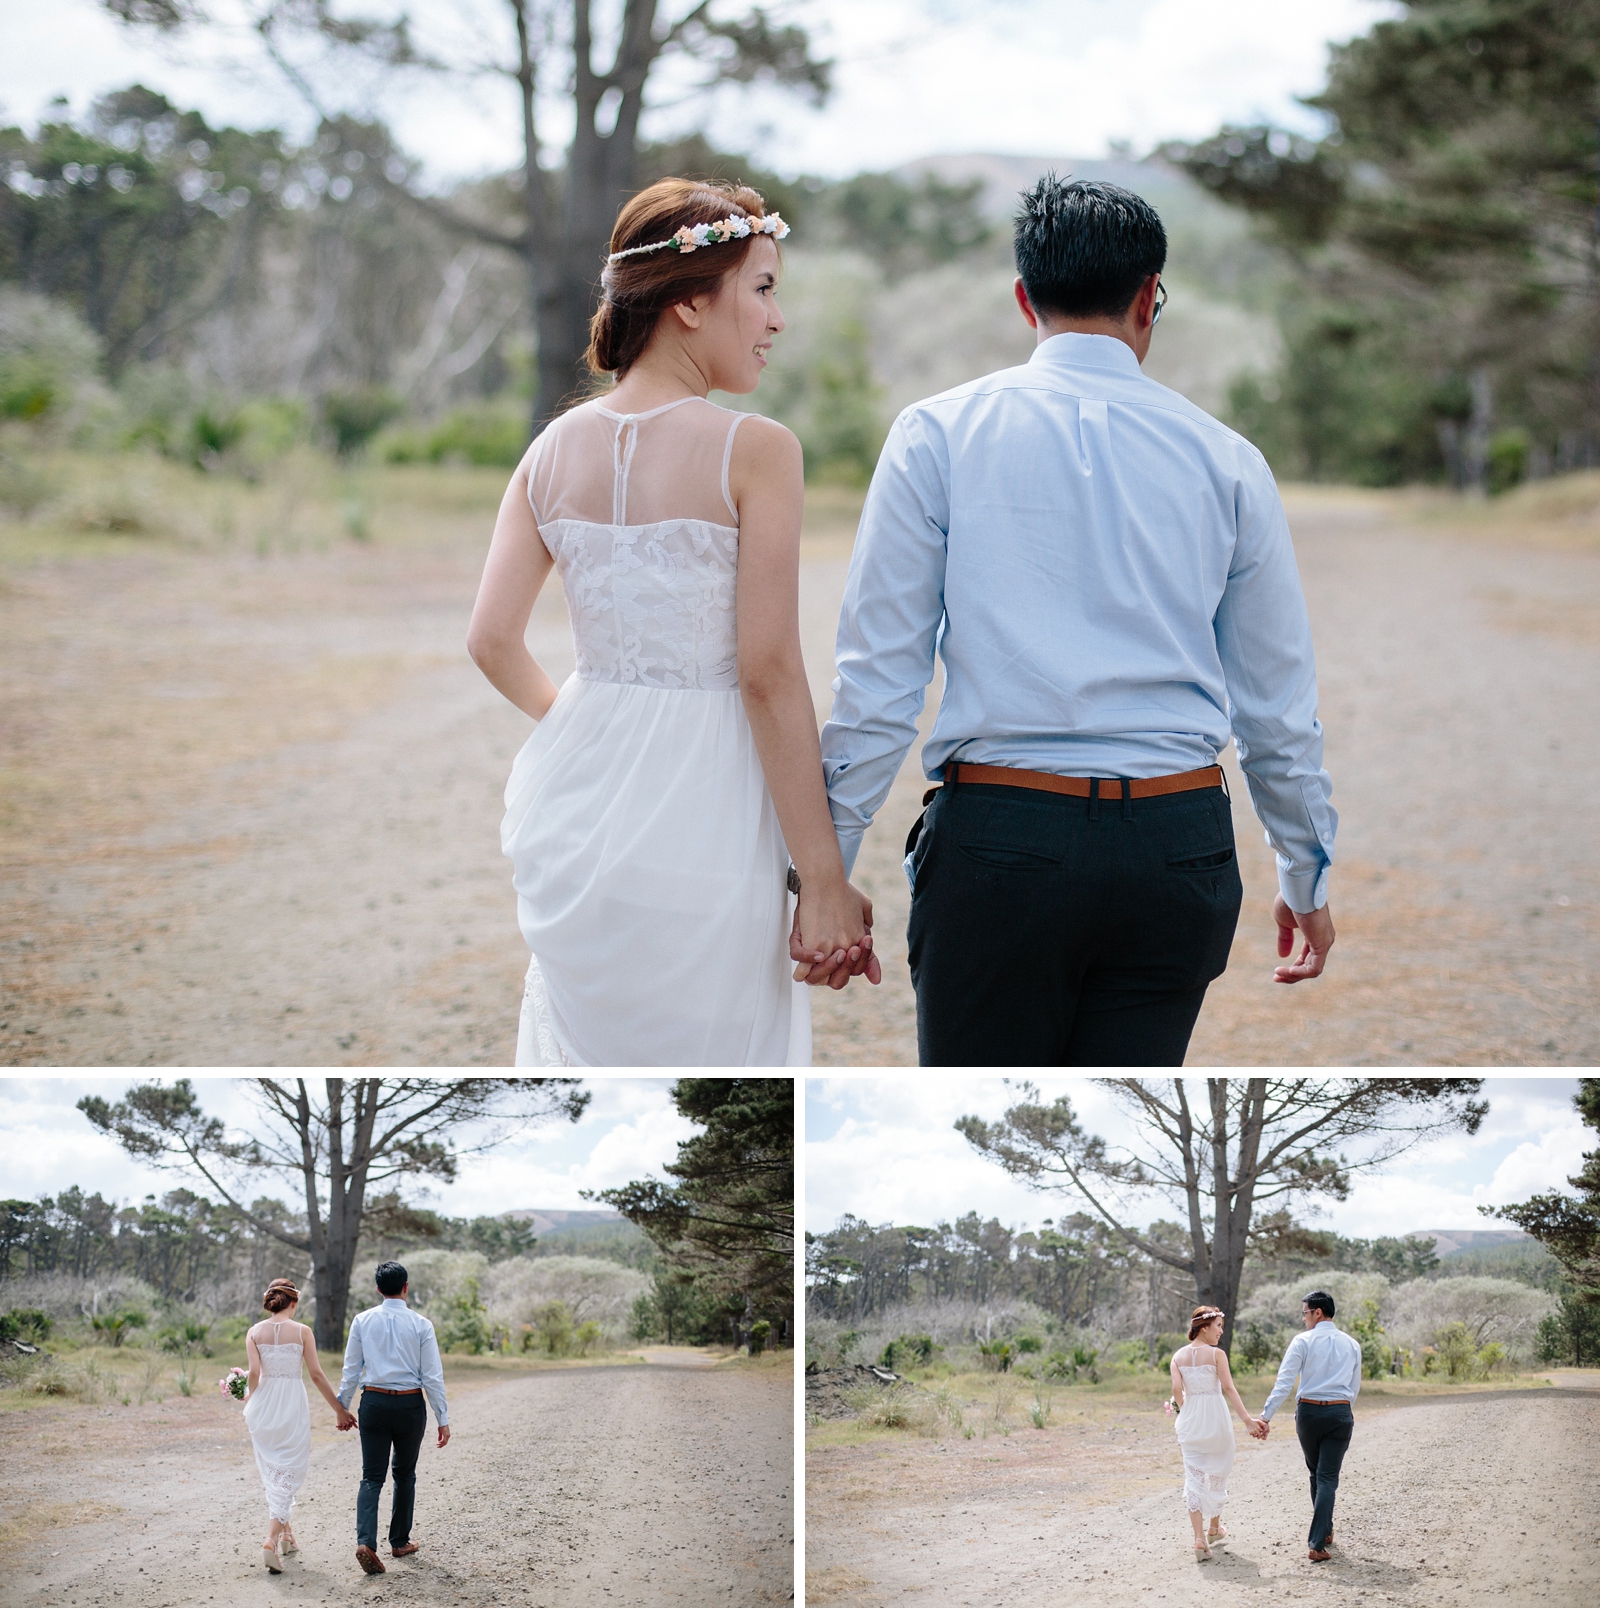 Ram and Gia / Auckland Elopement Photographer / © Patty Lagera Photography